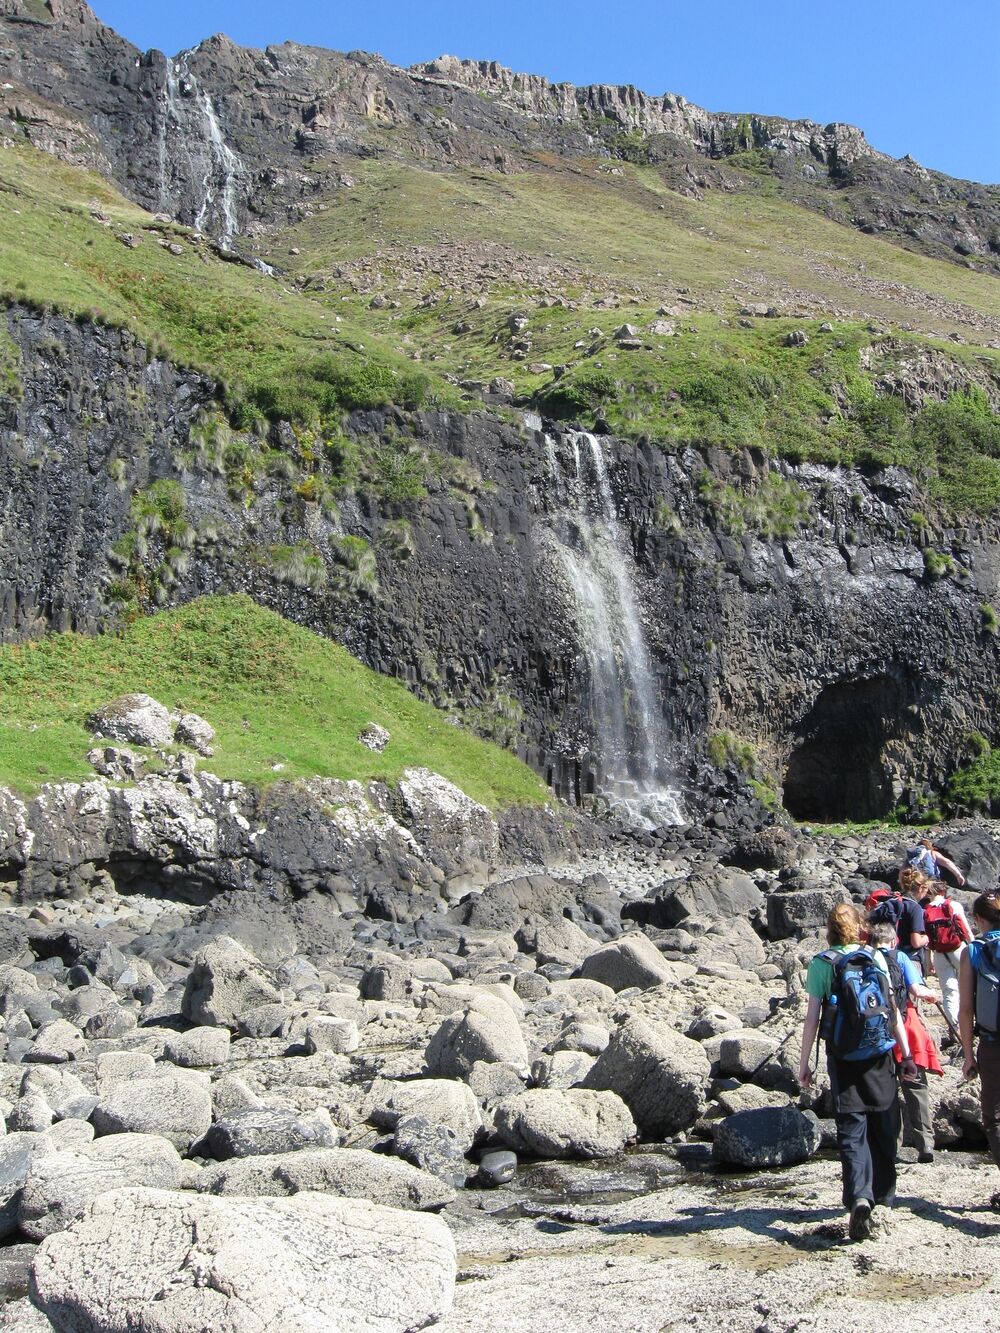 A waterfall tumbles over a cliff to the boulder-strewn beach below. Beside the bottom of the waterfall is a small cave. A group of people walk along the beach towards the cave.